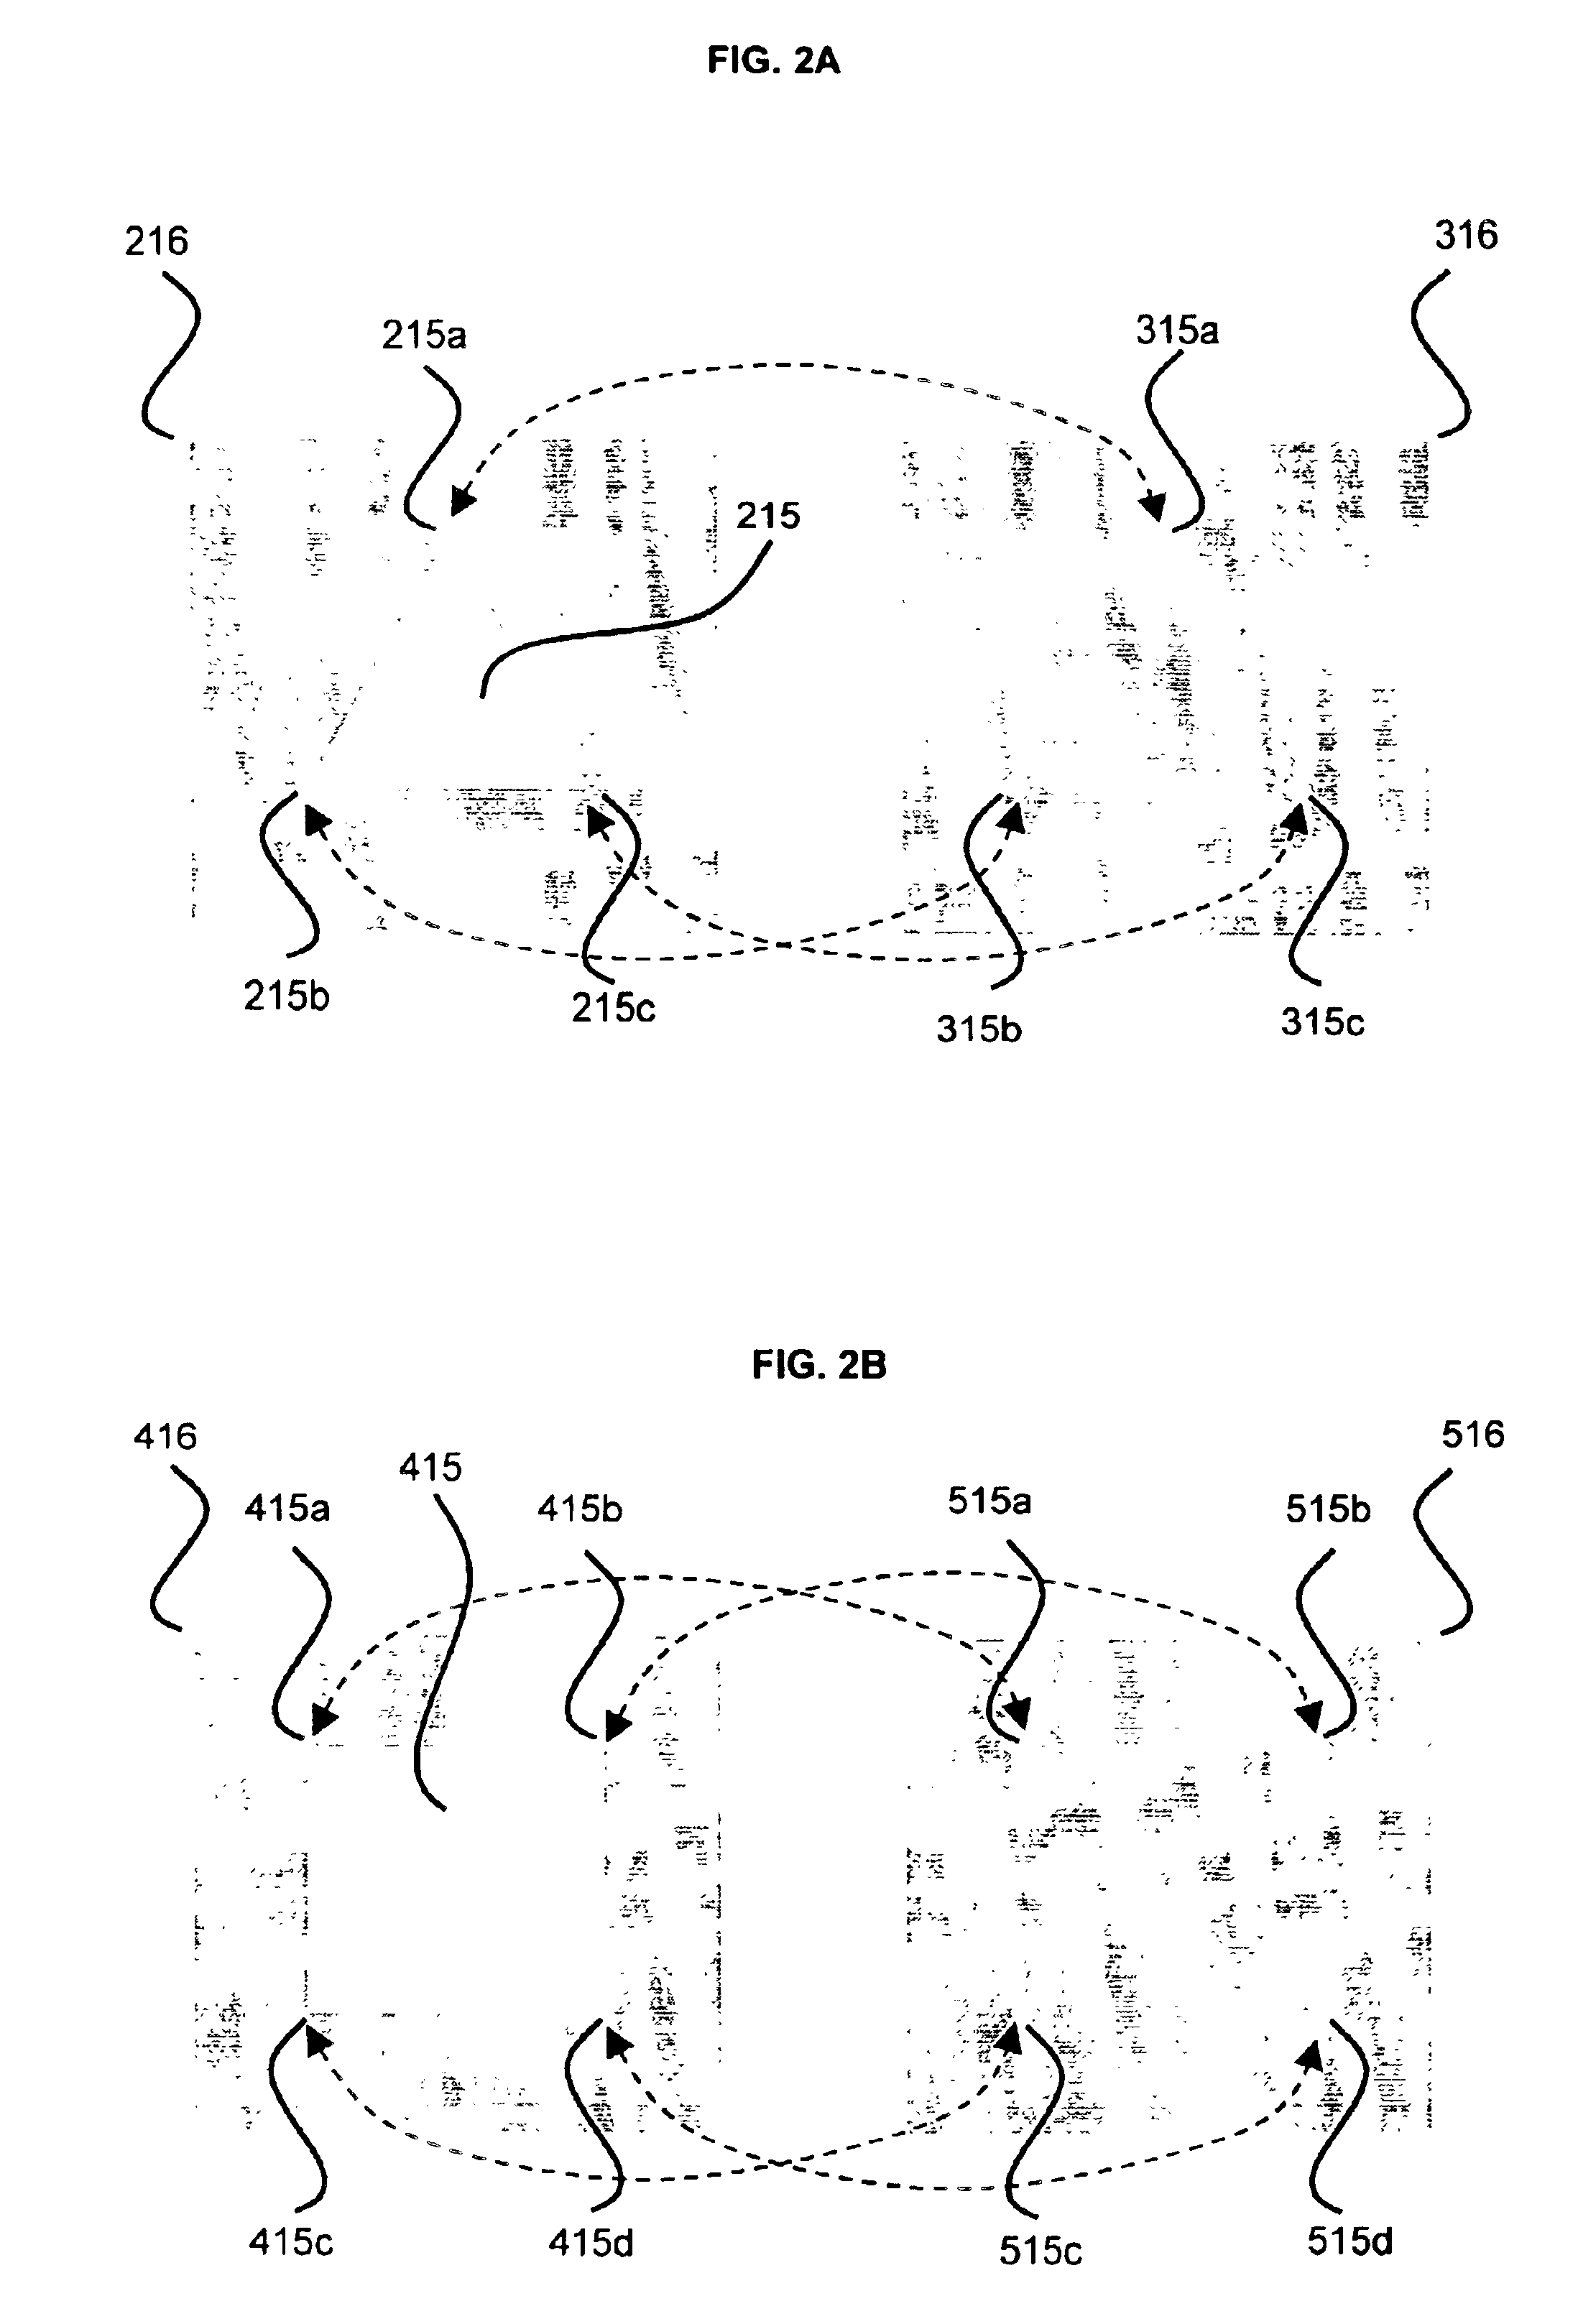 Apparatus and a method for more realistic shooting video games on computers or similar devices